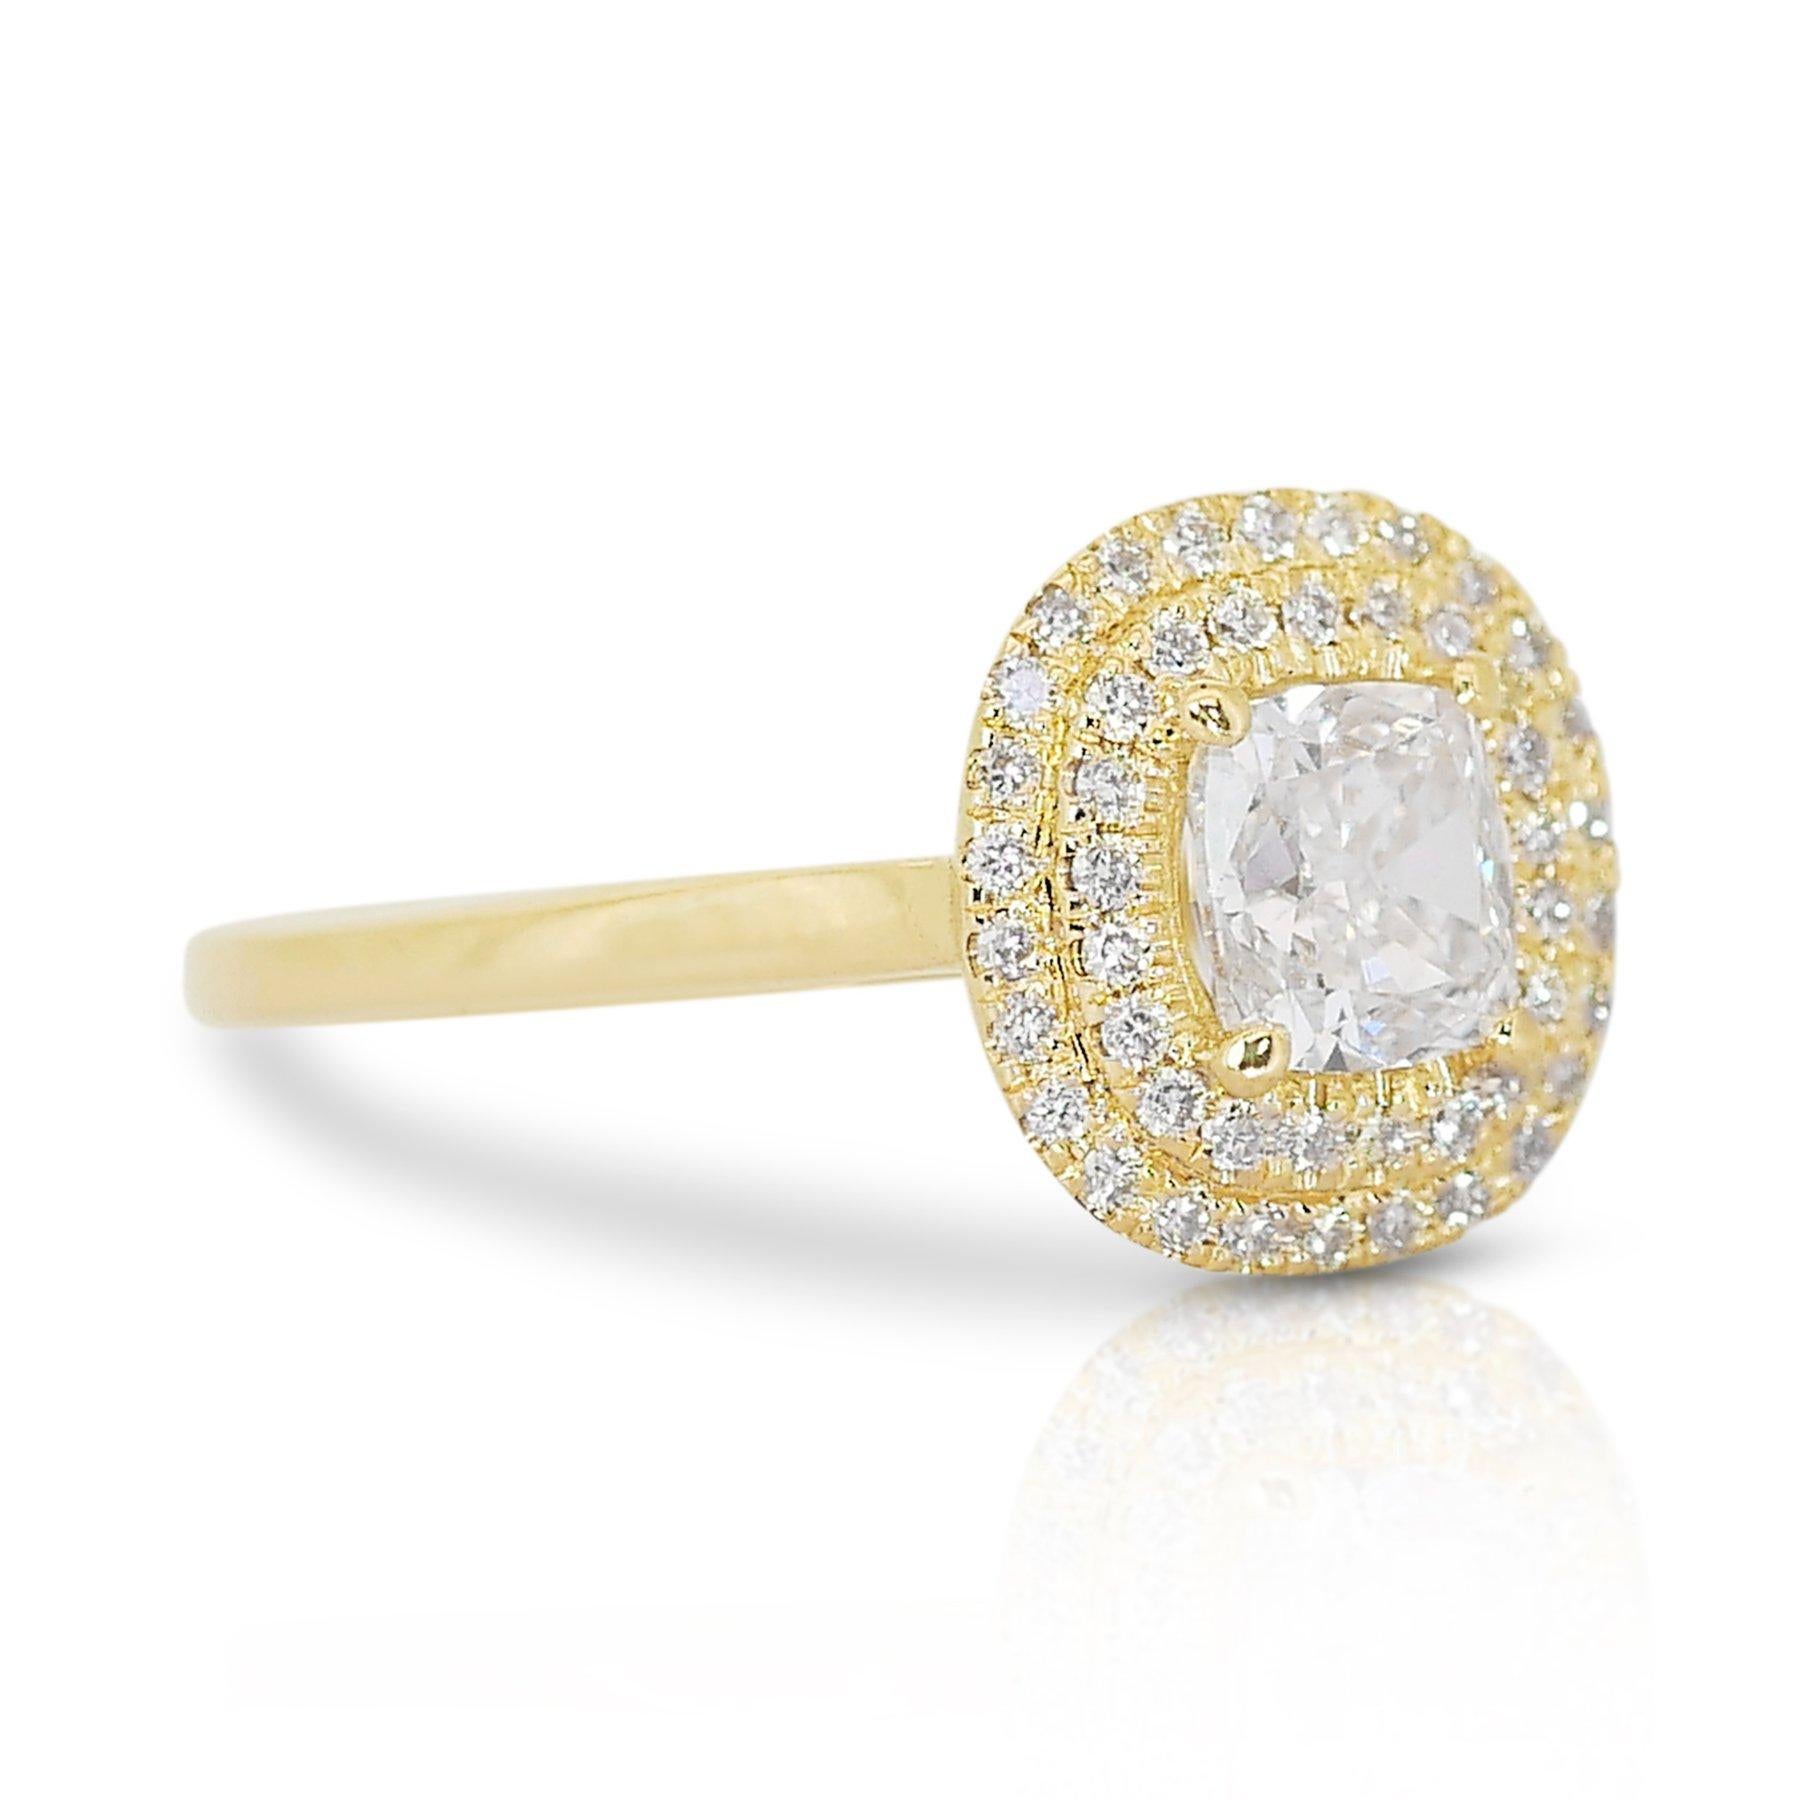 Cushion Cut Magnificent 1.22ct Diamond Double Halo Ring in 18k Yellow Gold - GIA Certified For Sale